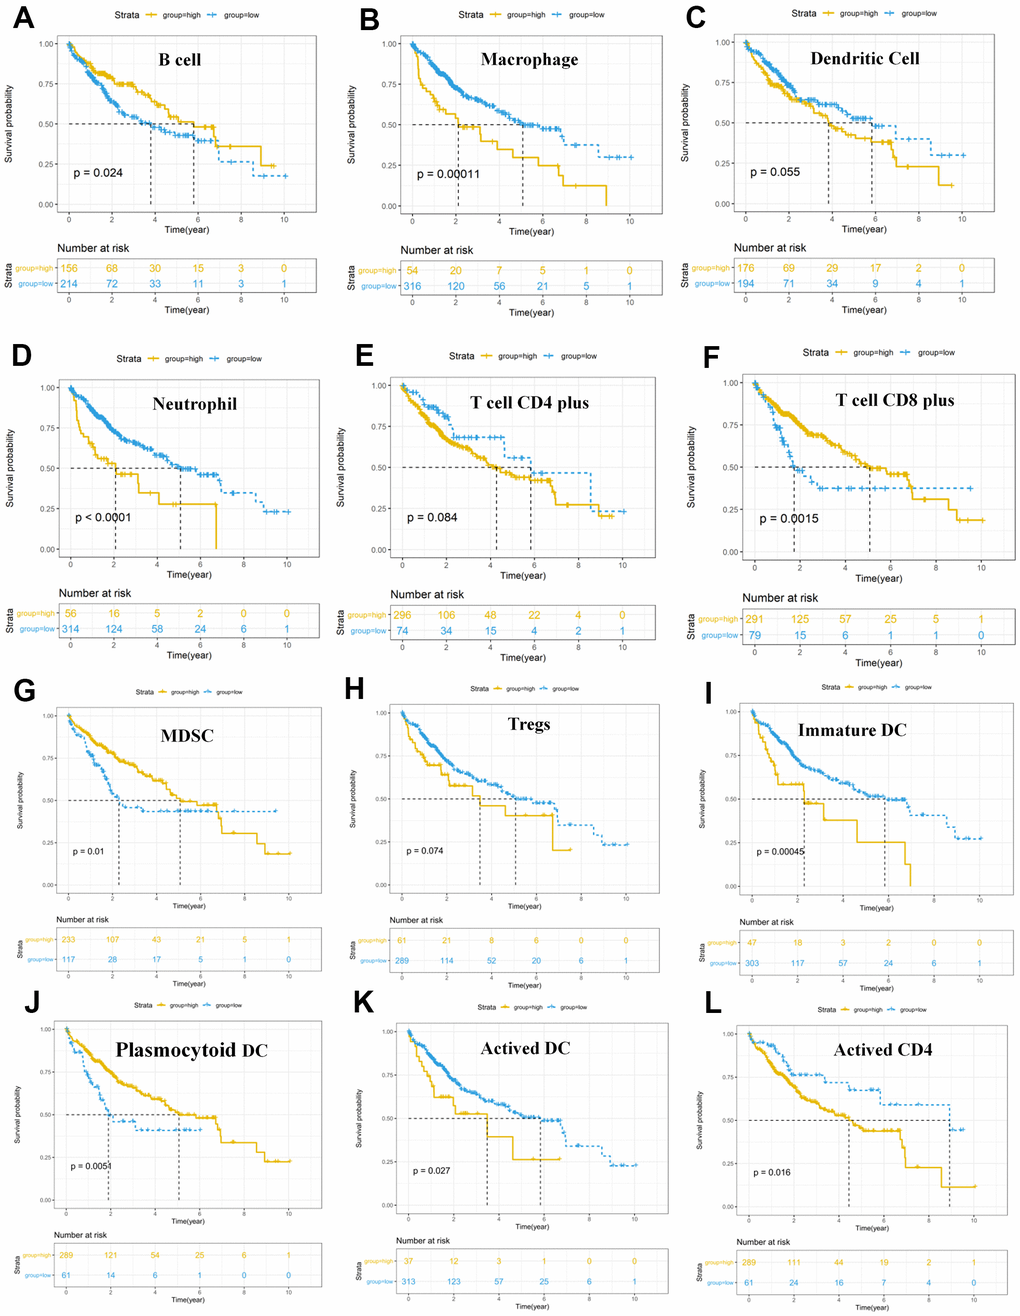 Survival analysis of immune cells based on the TIMER database. Horizontal and vertical axes represent survival times and survival rates, respectively. Yellow and blue curves are samples with higher and lower immune cell fractions, respectively. (A–L) Lower infiltration levels of macrophages (B), dendritic cells (C), and neutrophil (D), CD4+ T cells (E), Tregs (H), Immature DC (I), Activated DC (K) and Activated CD4 (L) with improved survival outcomes, and higher infiltration levels of B cells (A), CD8+ T cells (F), MDSC (G) and Plasmocytoid DC (J) were associated with poor survival outcomes in HCC. HCC, hepatocellular carcinoma; TIMER, Tumor Immune Estimation Resource; Tregs, T cells regulatory; MDSC, myeloid-derived suppressor cells.